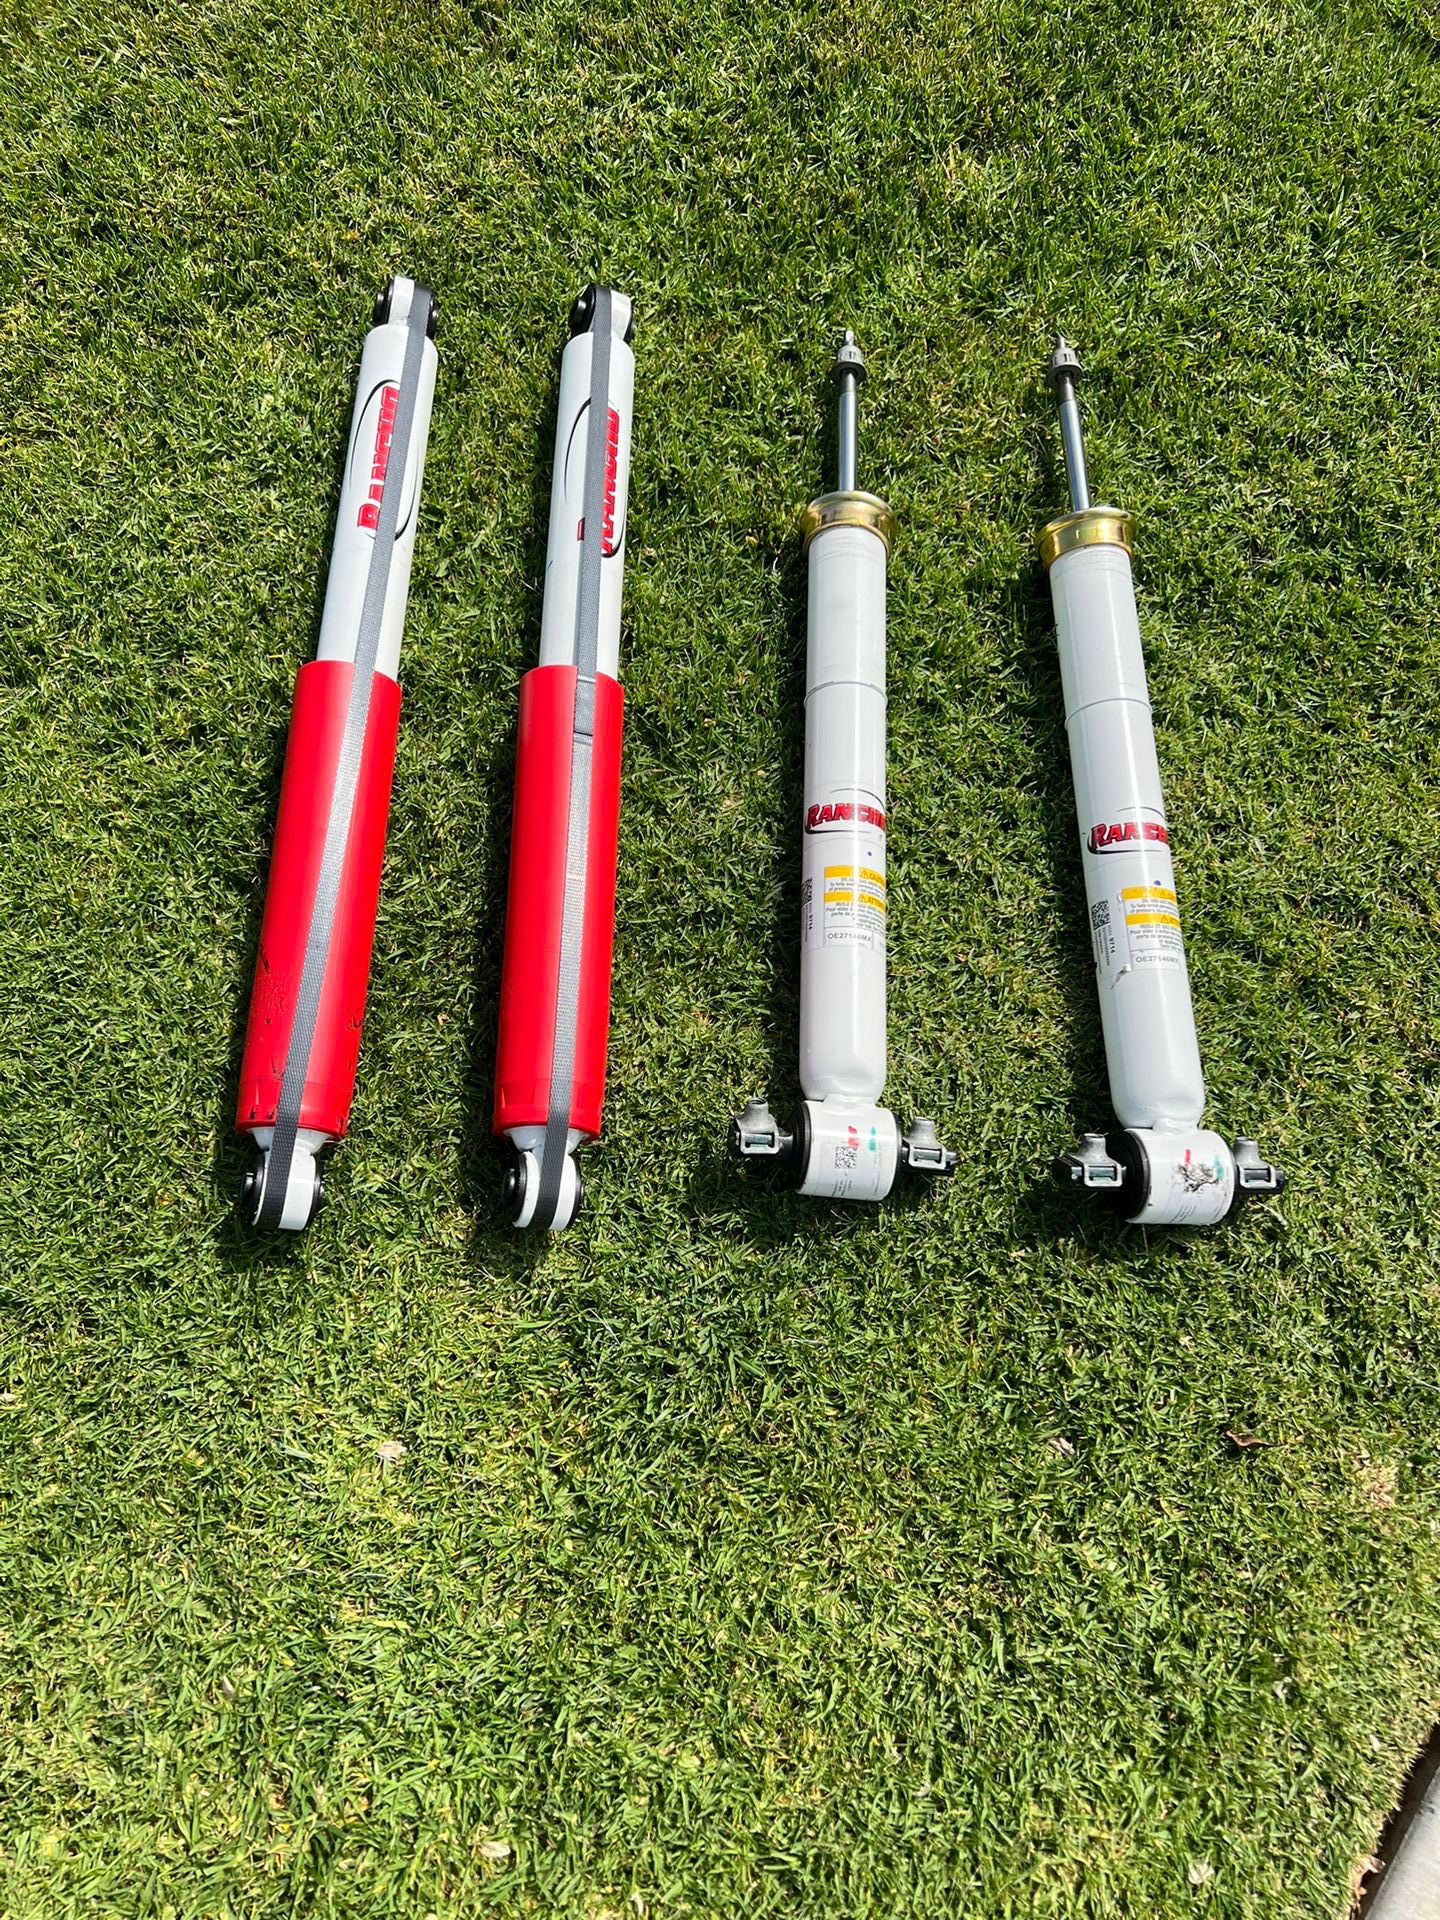 Rancho shocks removed from 2024 trail boss. Shocks were removed two days after purchase only 40 miles. Make offer.